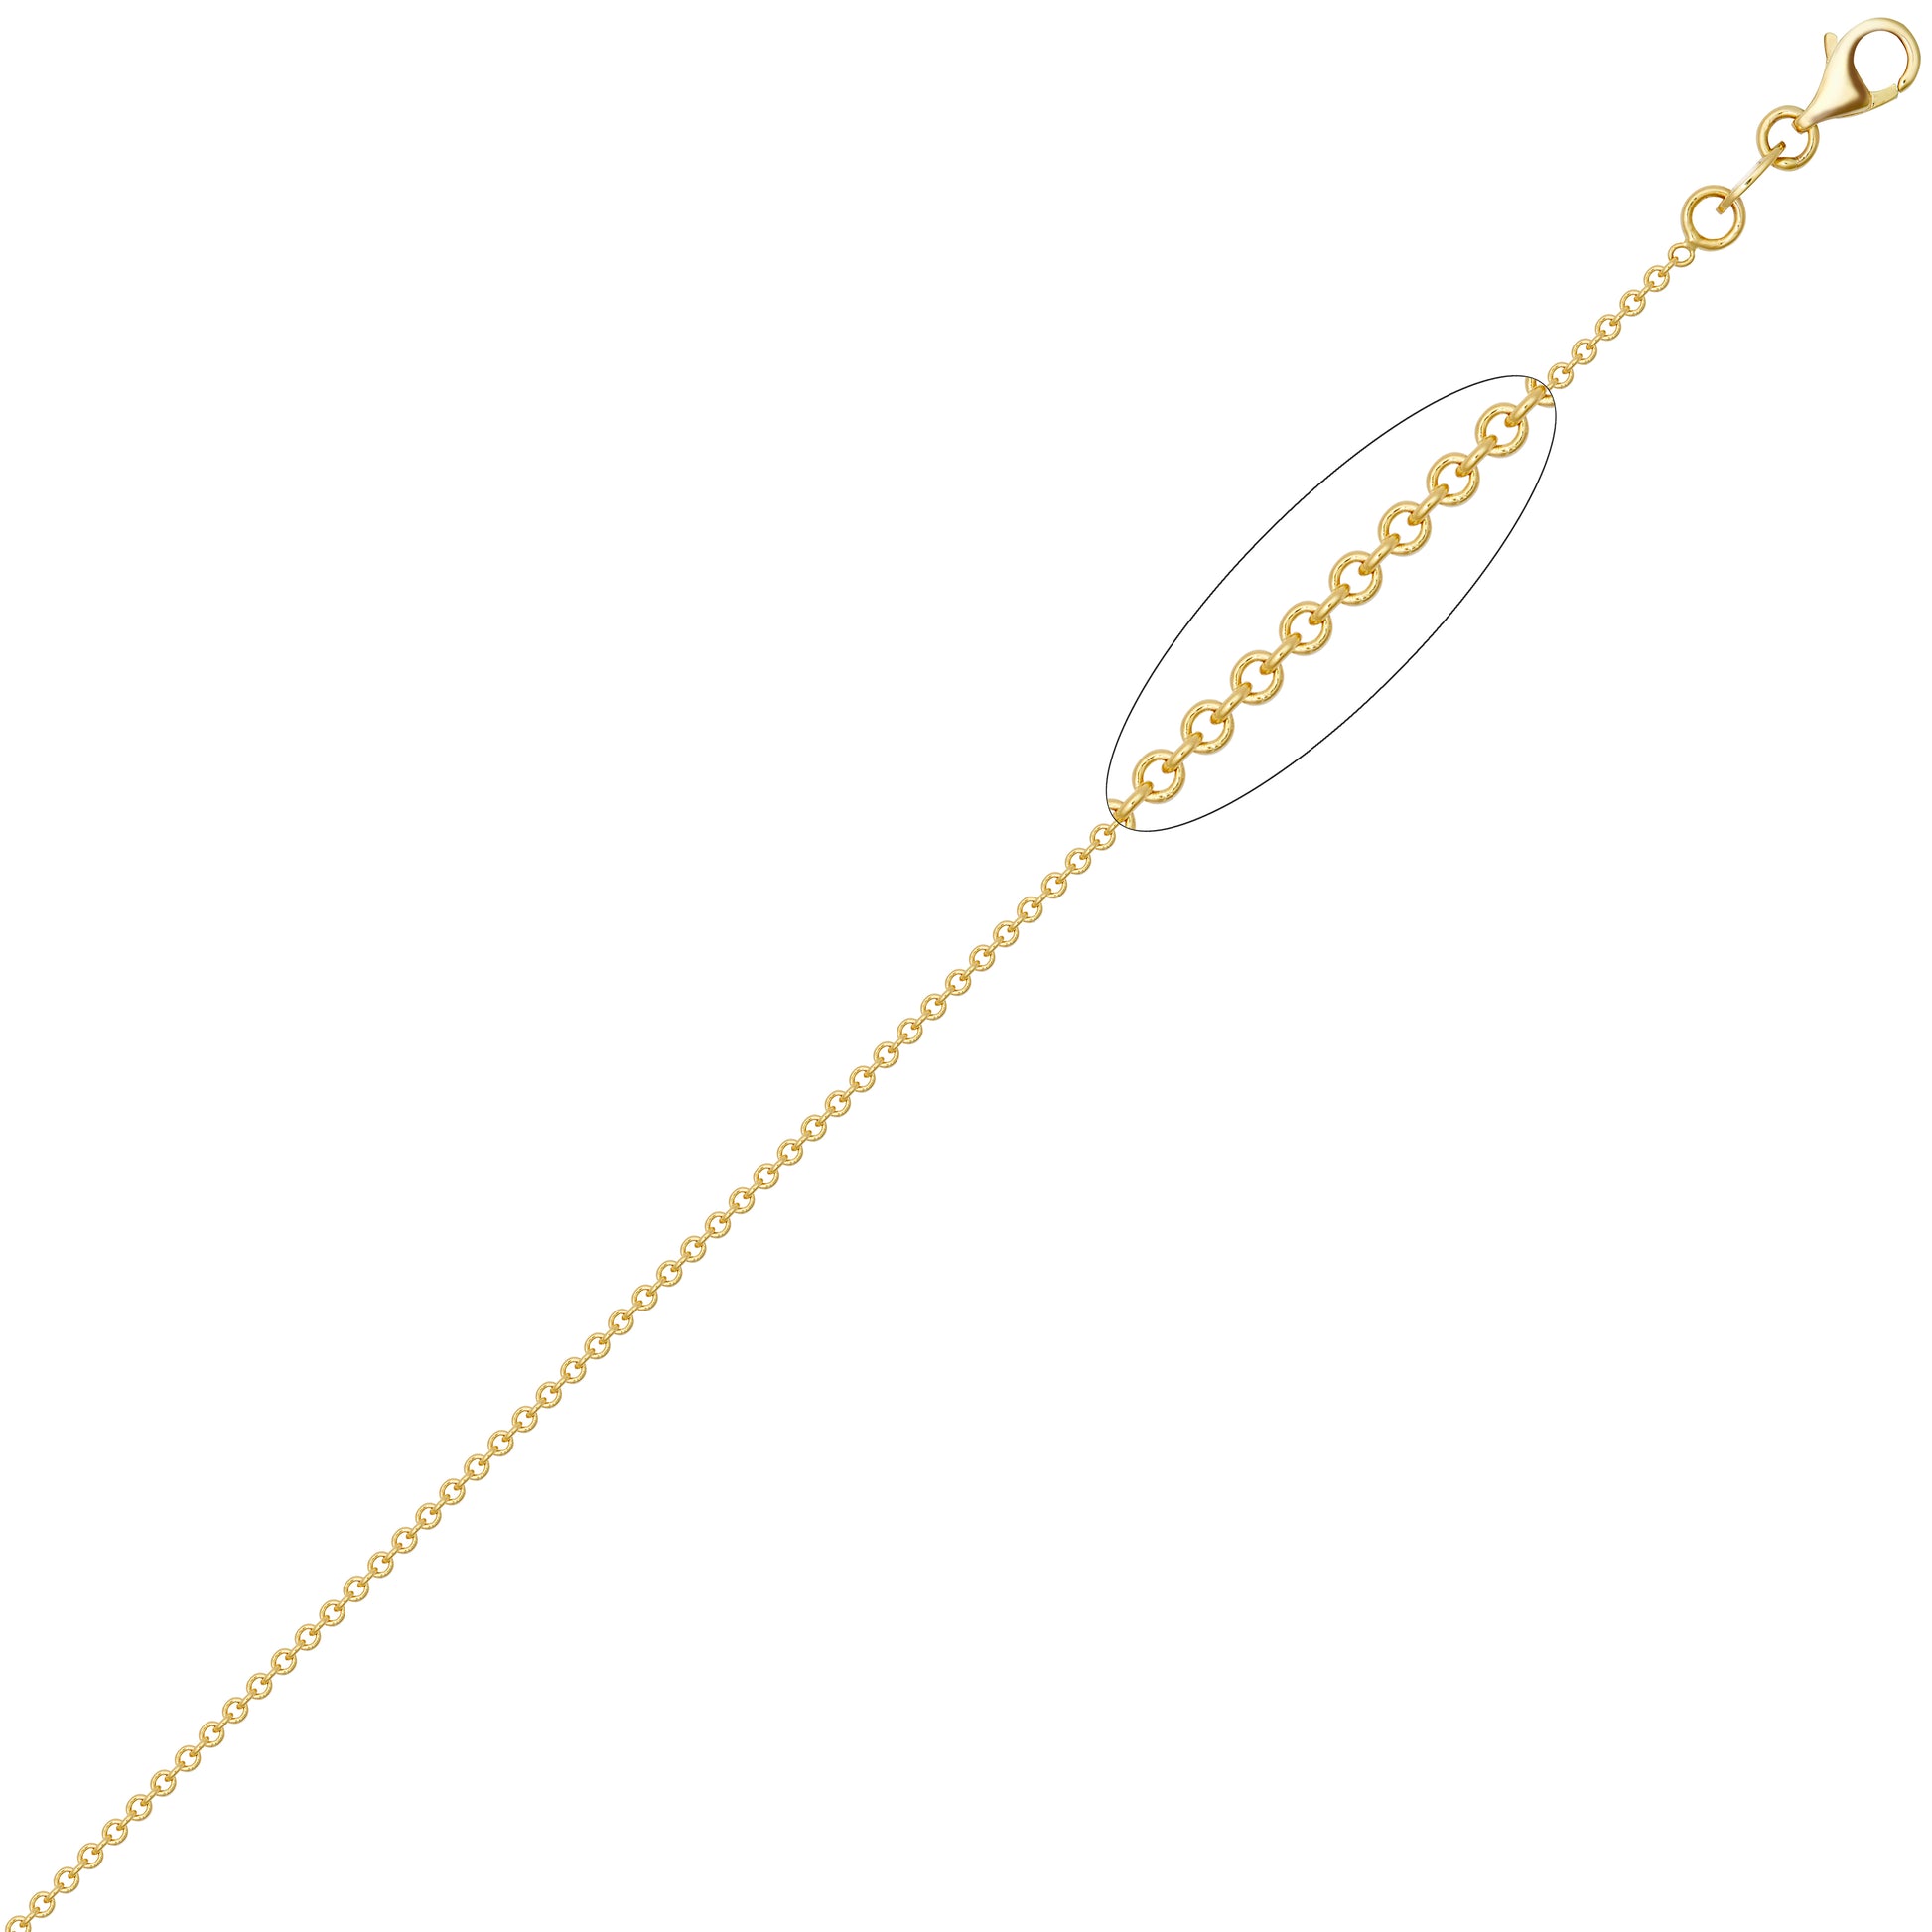 9ct Gold  Oval Link Rolo Trace 1.5mm Pendant Chain Necklace - JCN002J